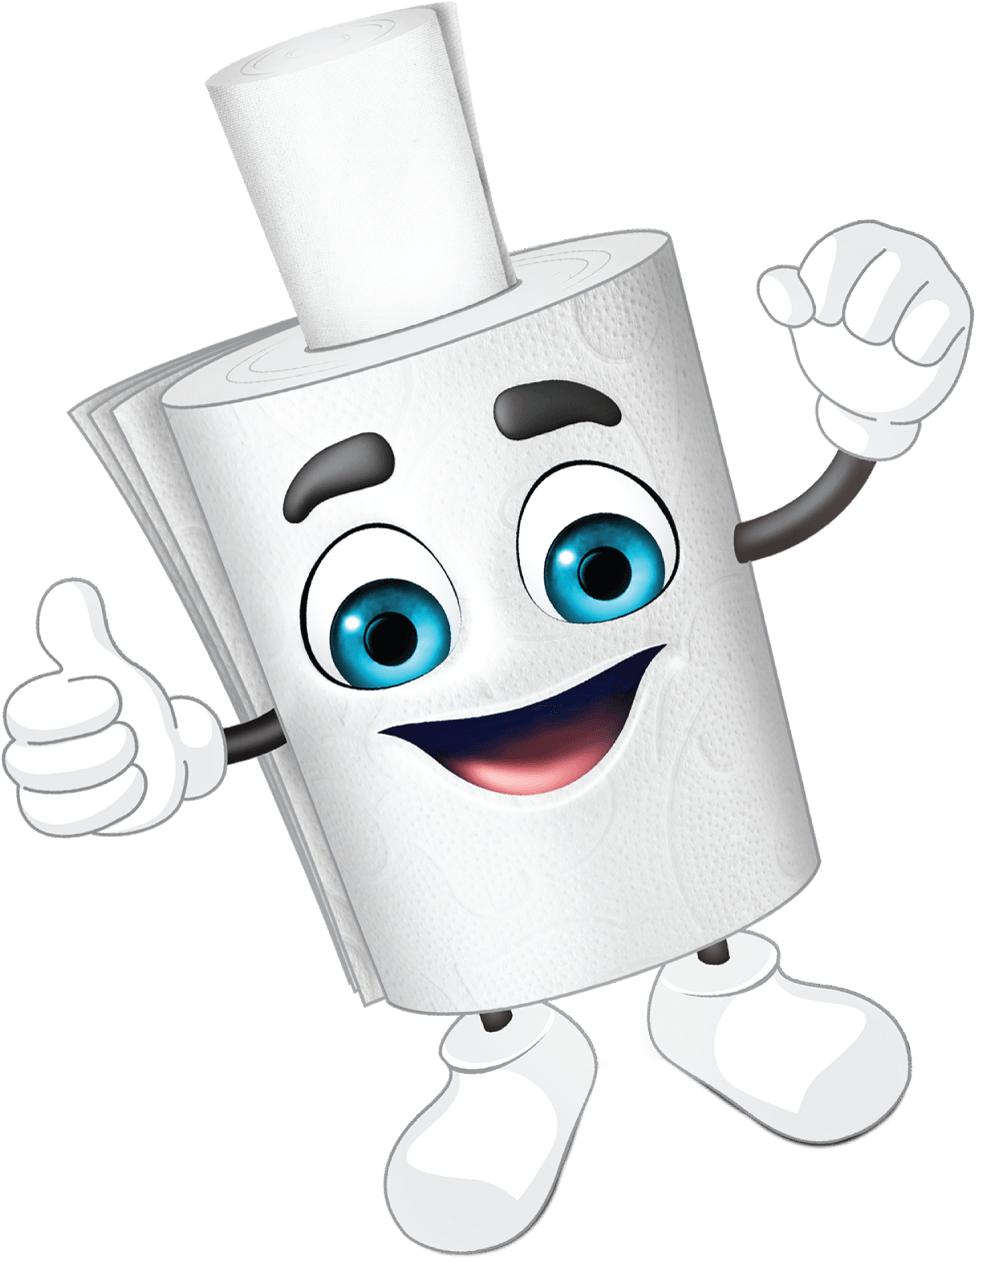 Rolly Toilet Paper Character